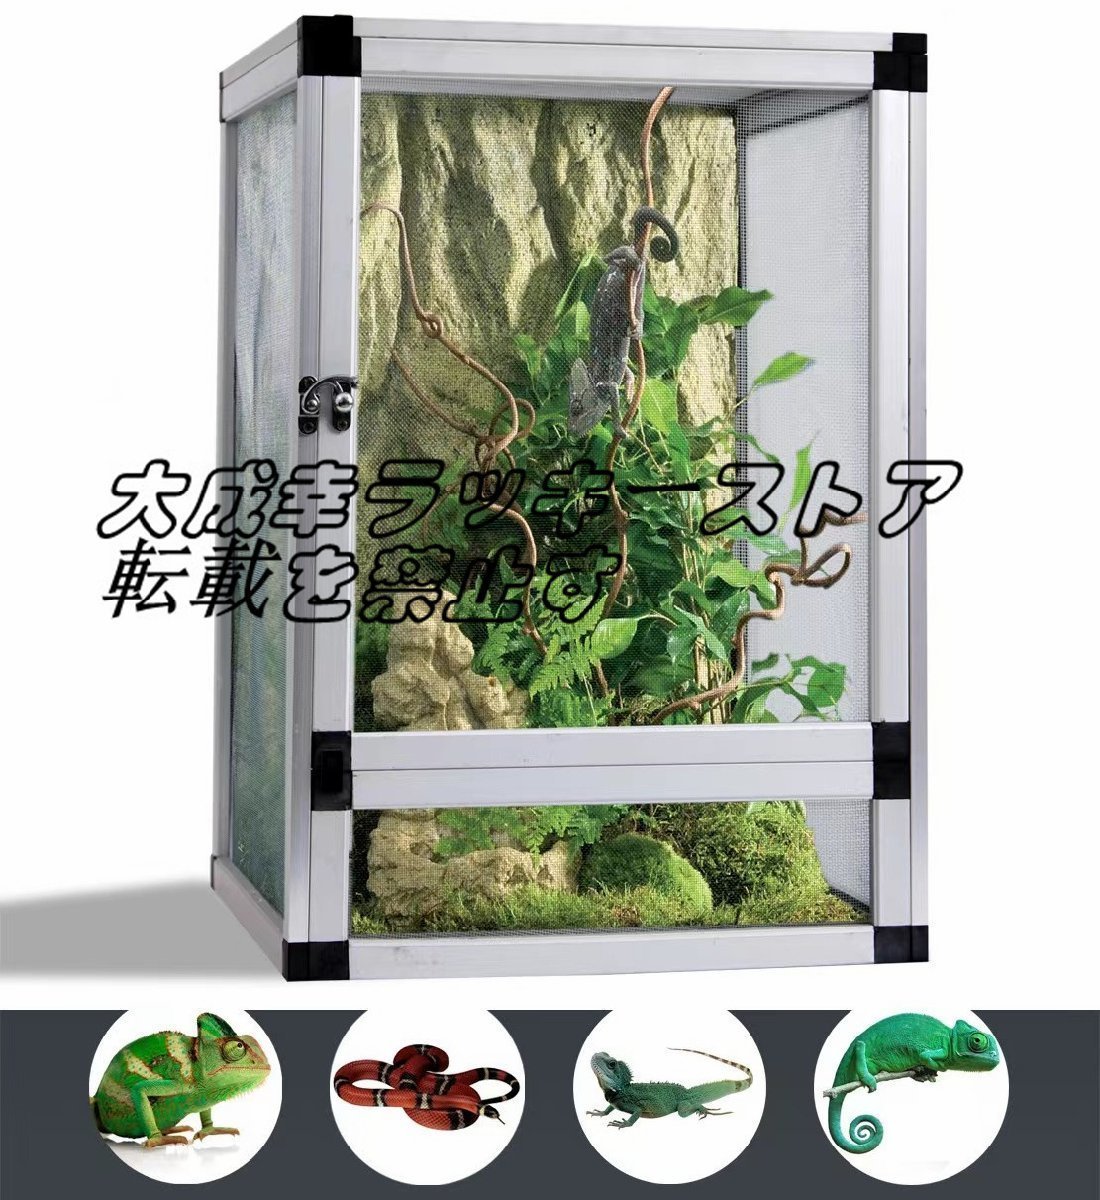  shop manager special selection reptiles cage breeding case amphibia for insect breeding container small animals for transparent breeding box ventilation cage assembly type 45*45*80cm F1235